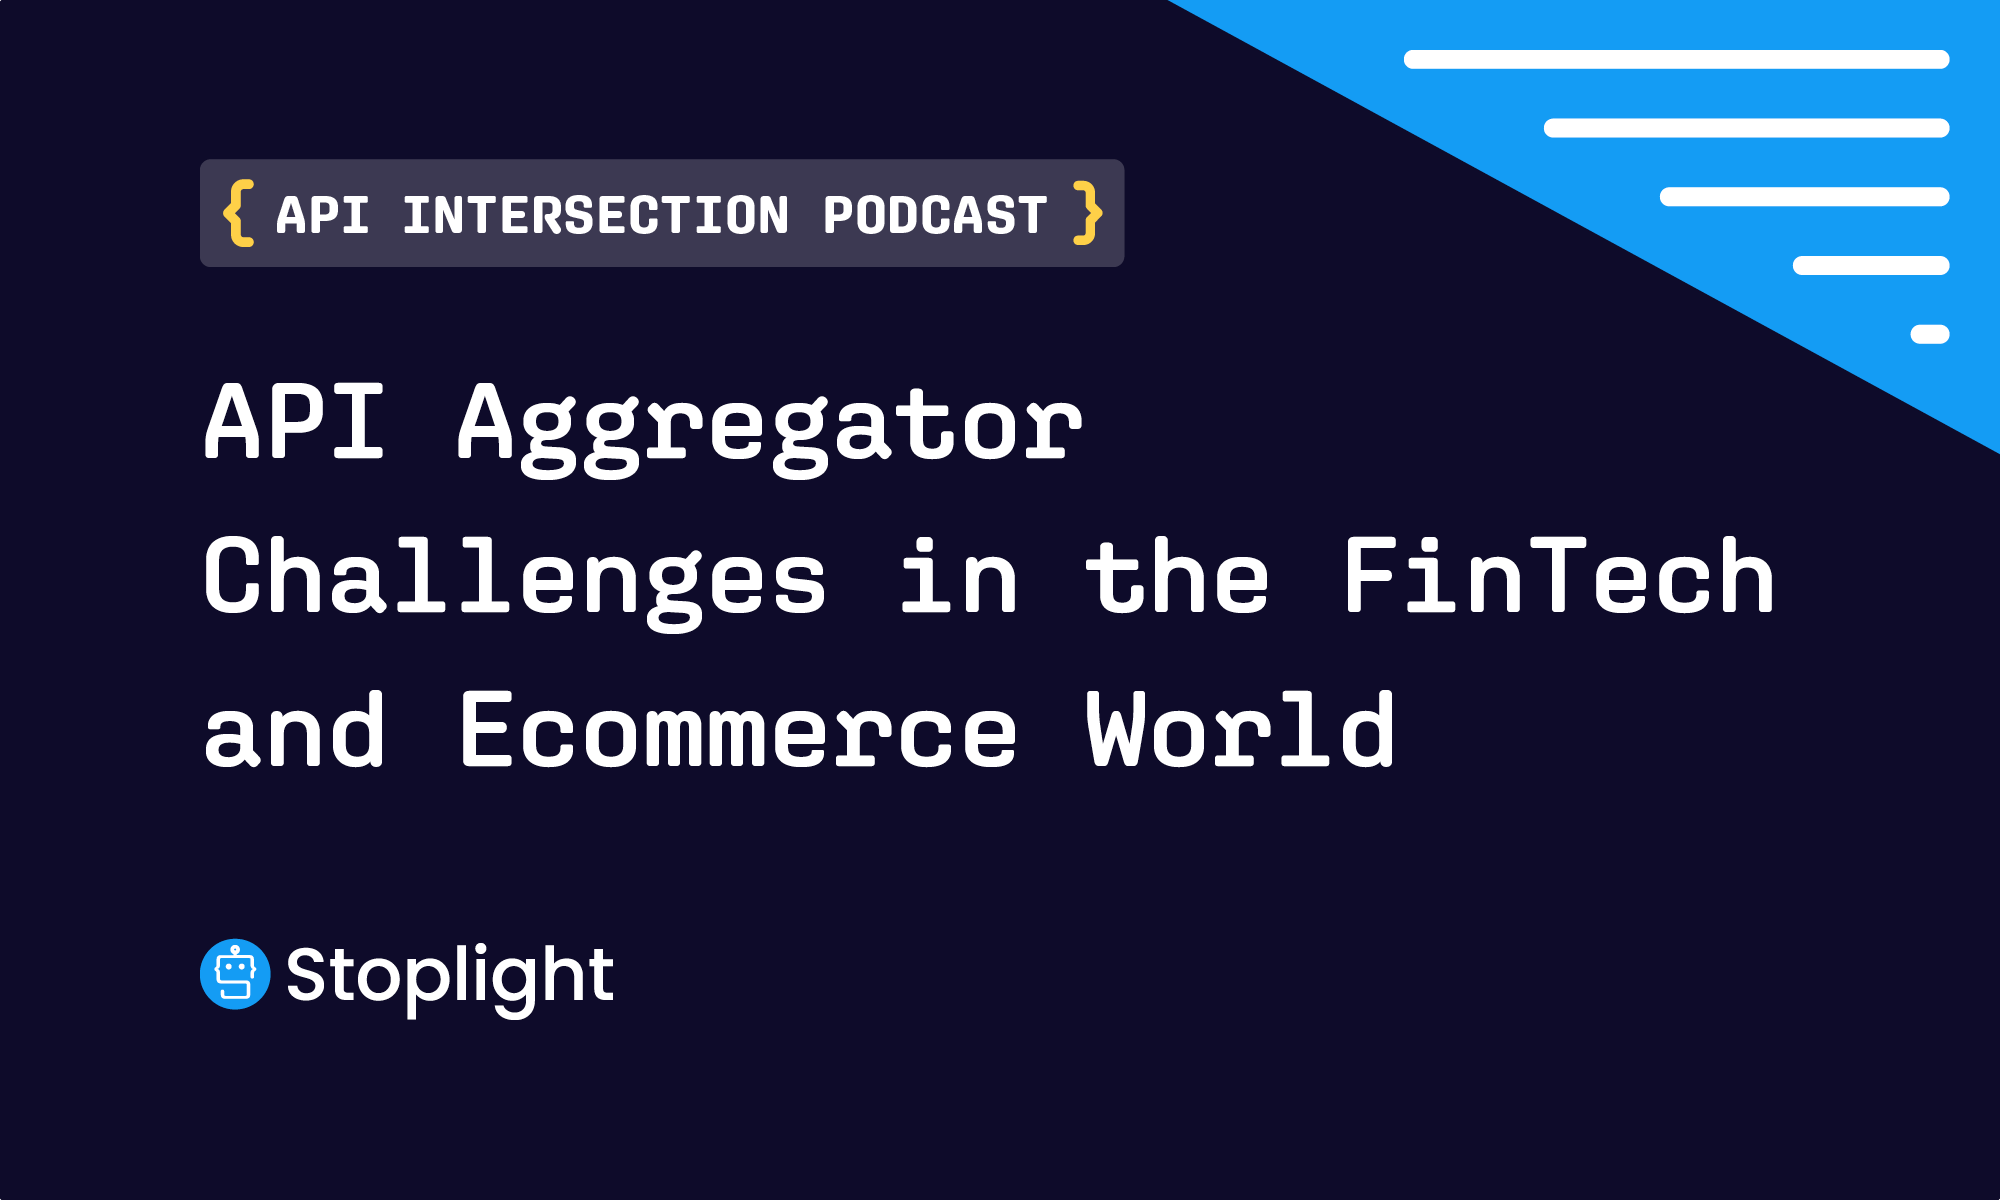 API Aggregator Challenges in the Fintech and eCommerce World